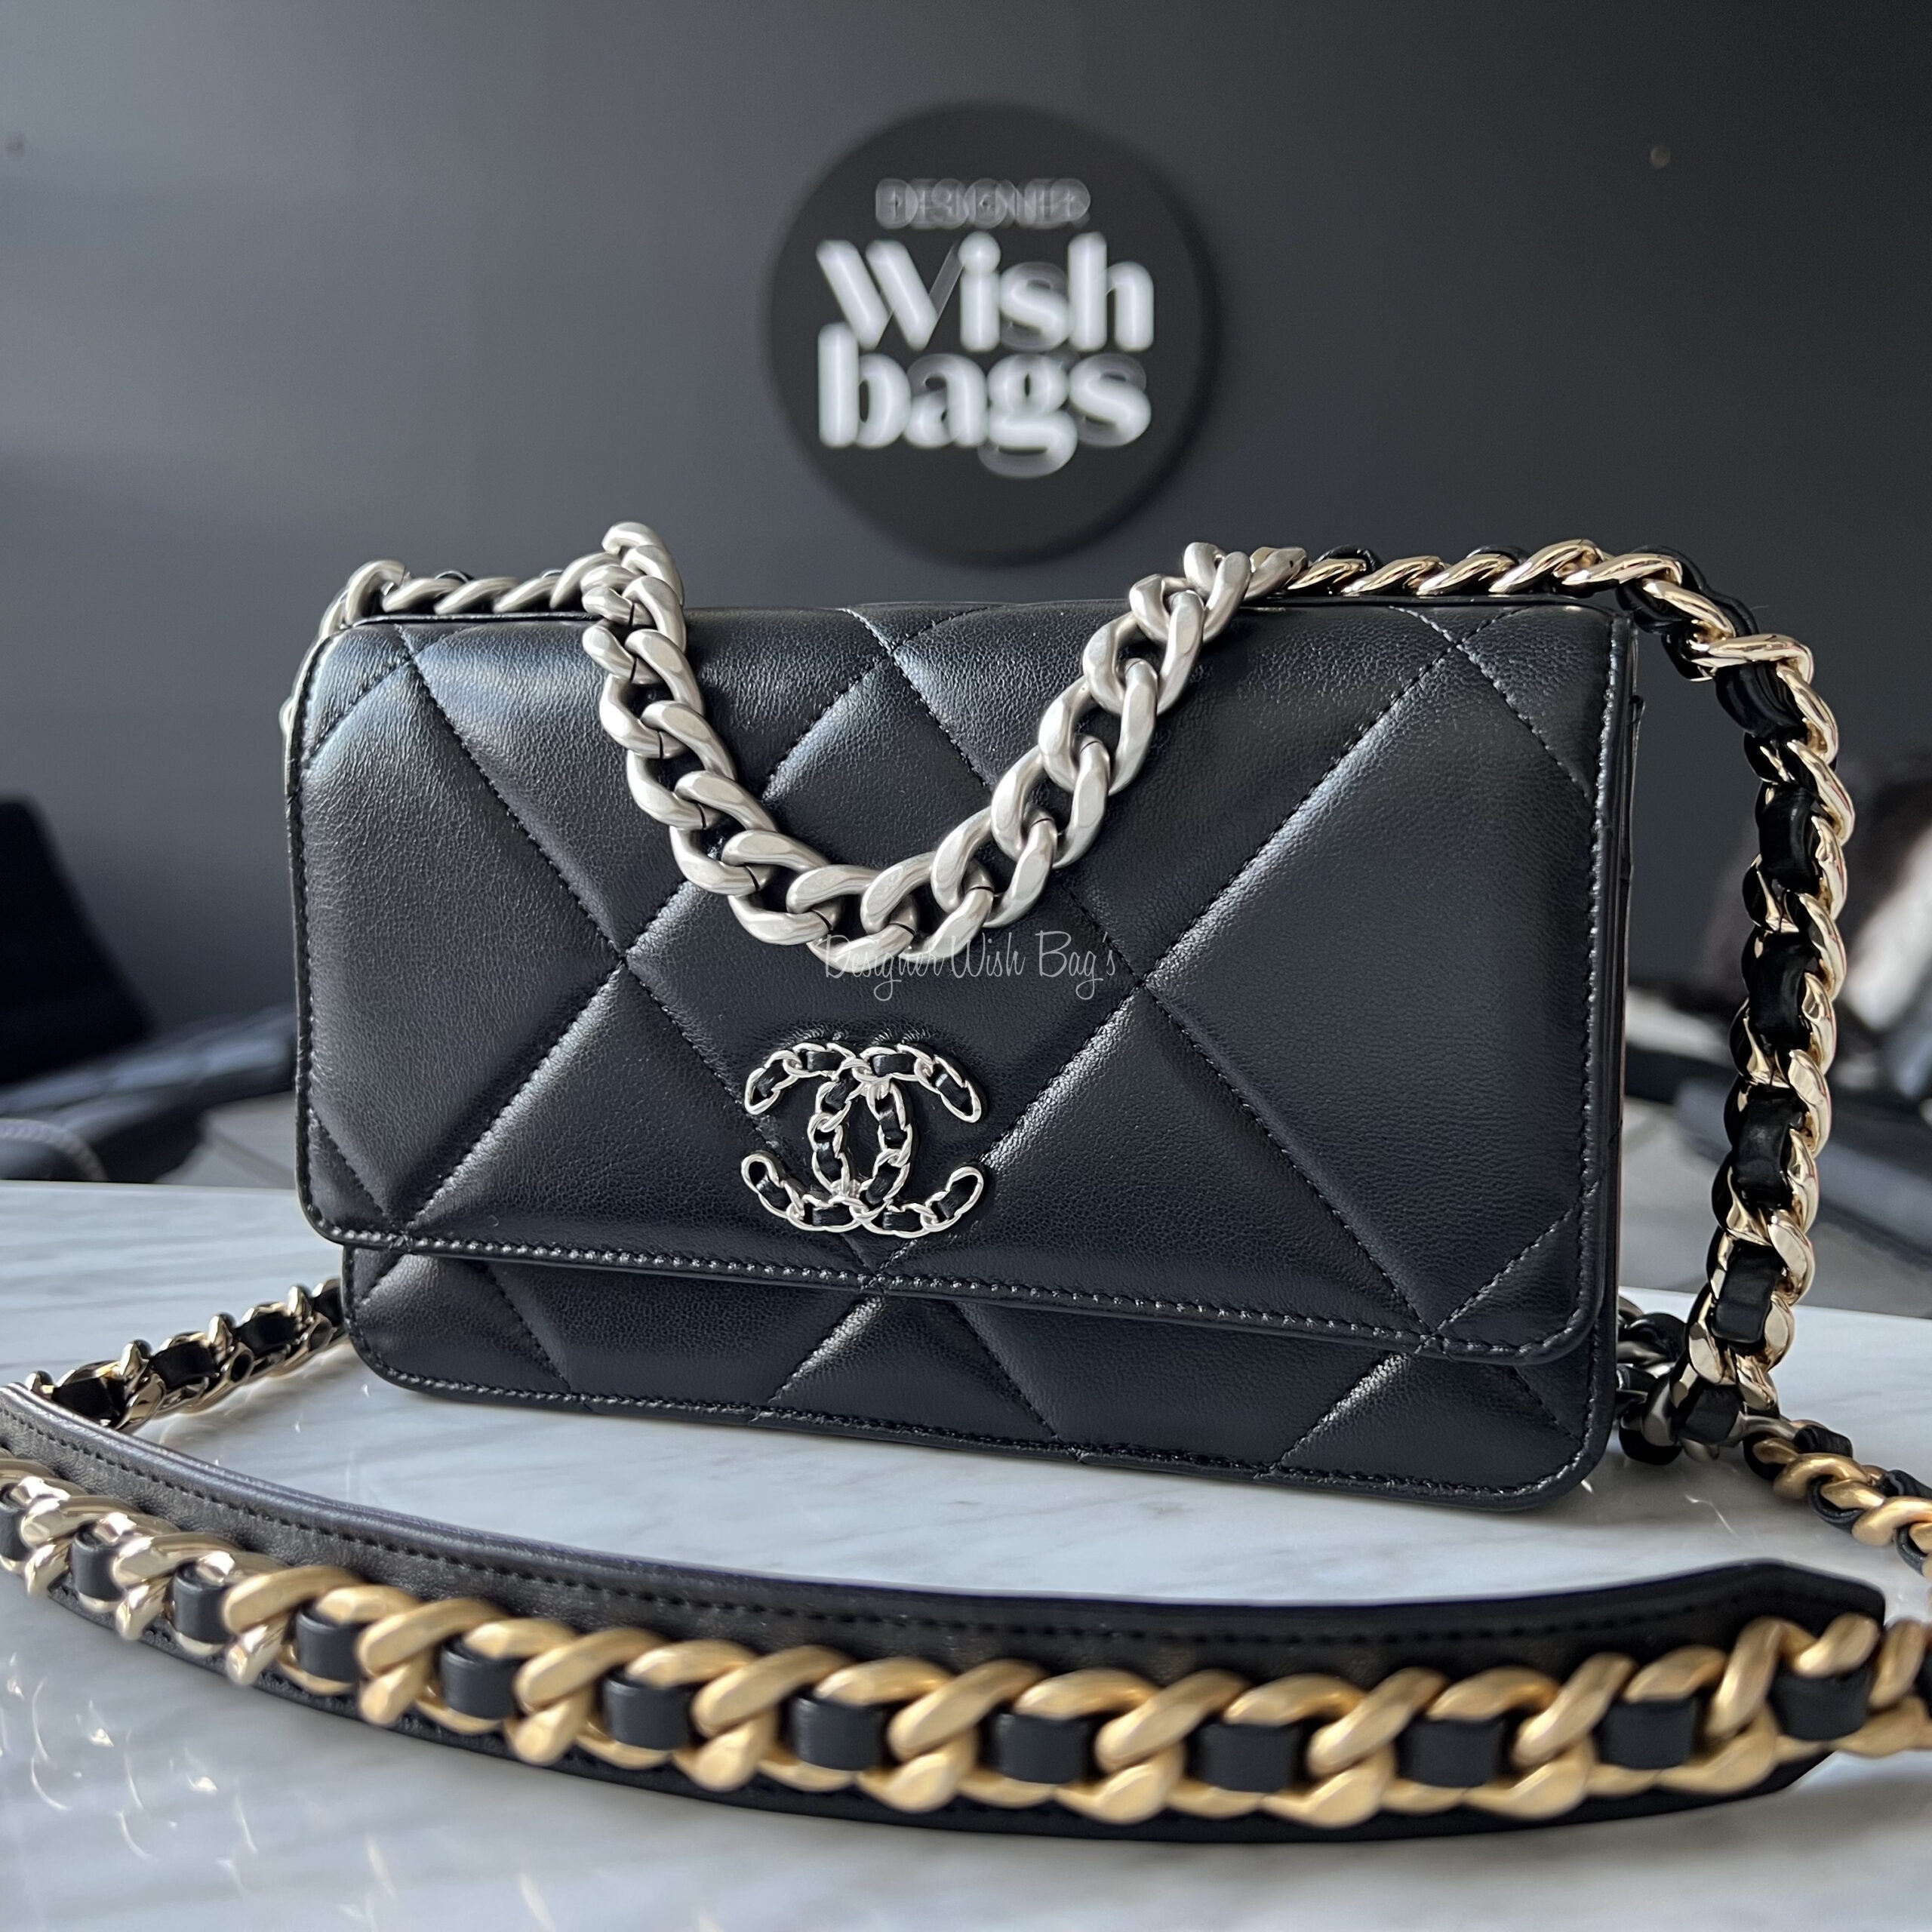 white chanel bag with black logo wallet